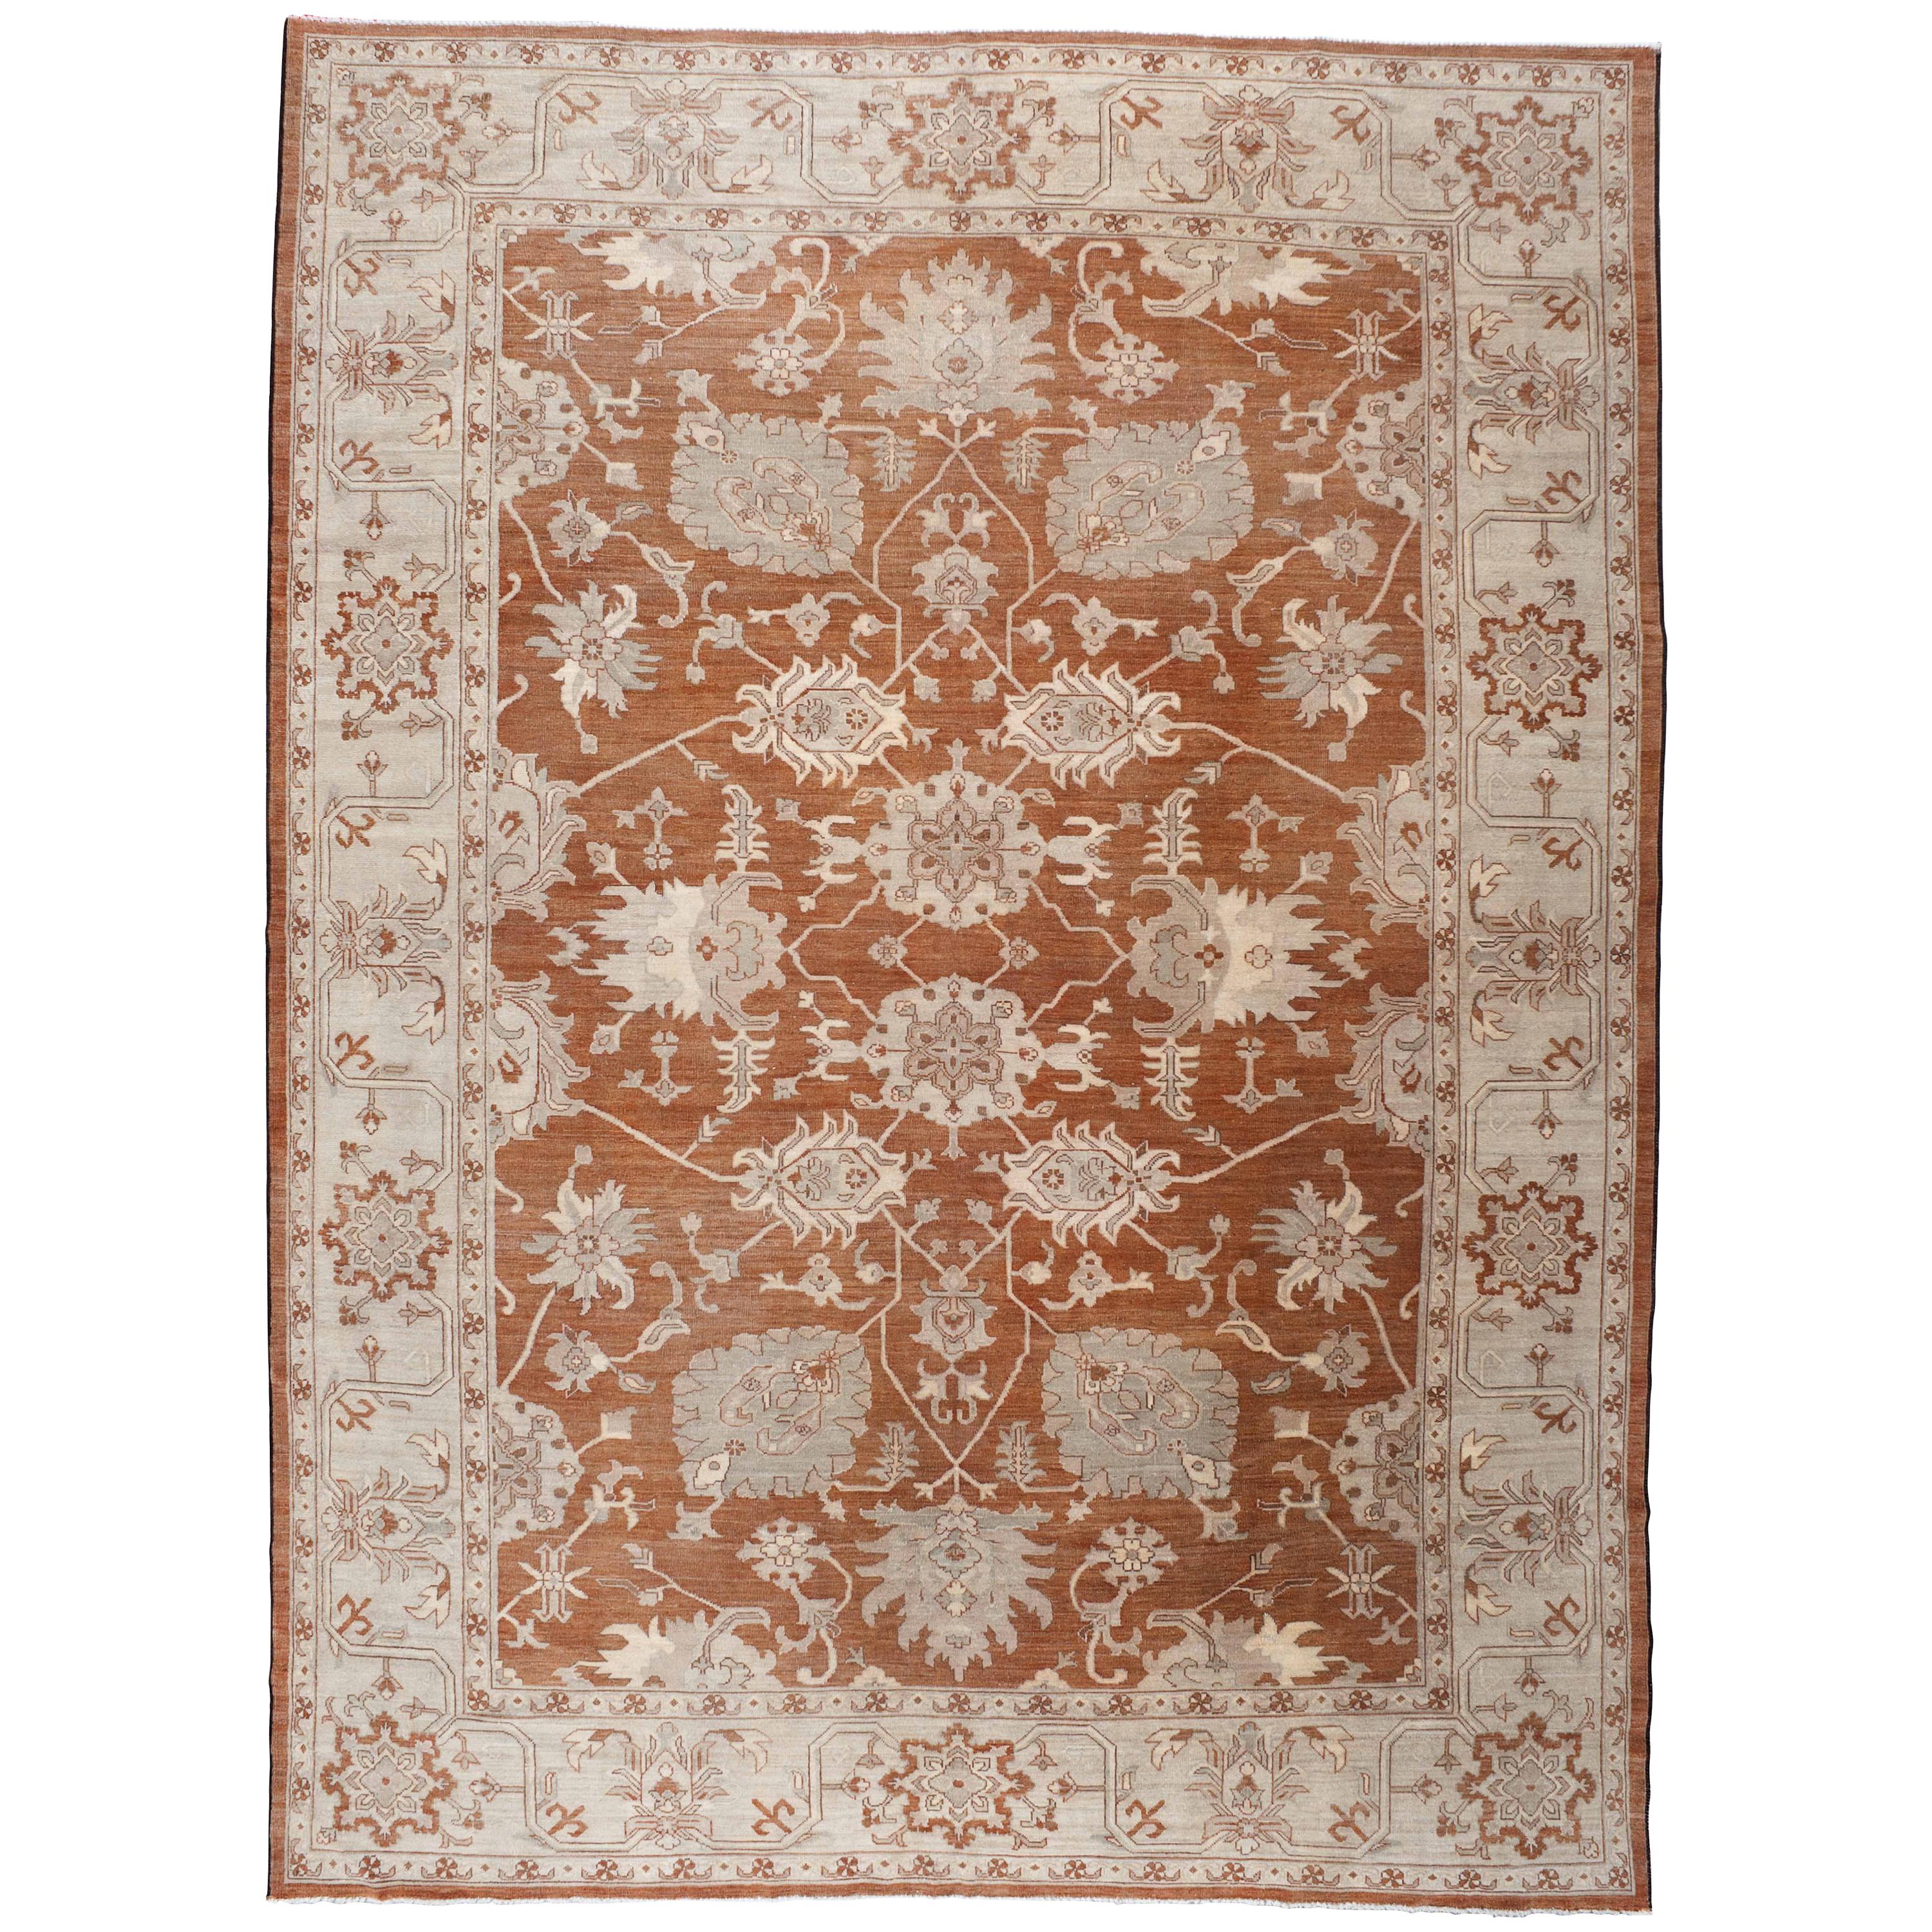 Red and Beige Floral Rug